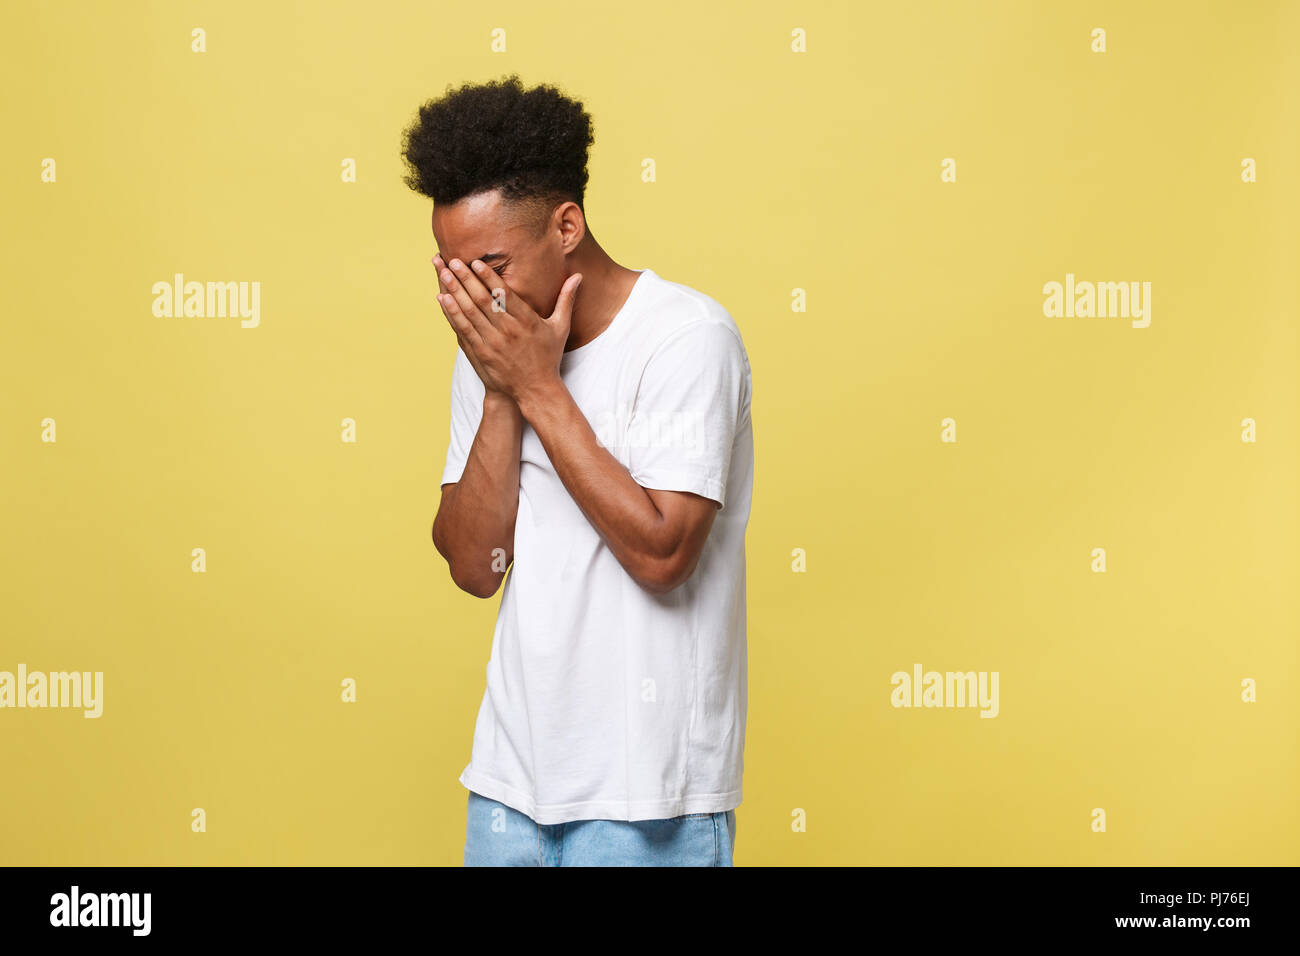 Closeup portrait man with sad expression, isolated on yellow wall background. Human emotions, body language, life perception. Duh moment. Stock Photo